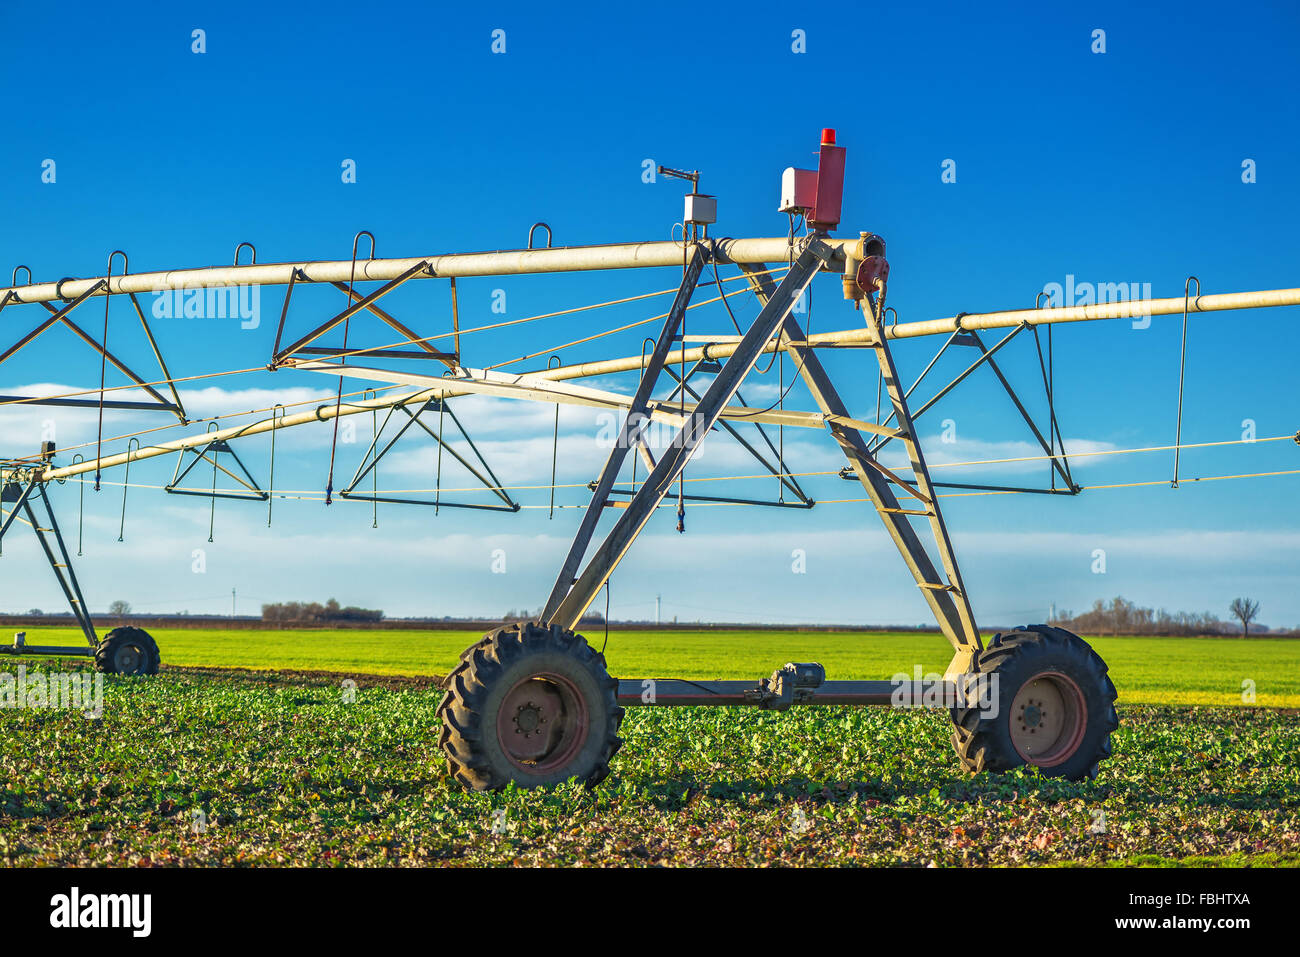 Automated farming irrigation sprinklers on cultivated field Stock Photo